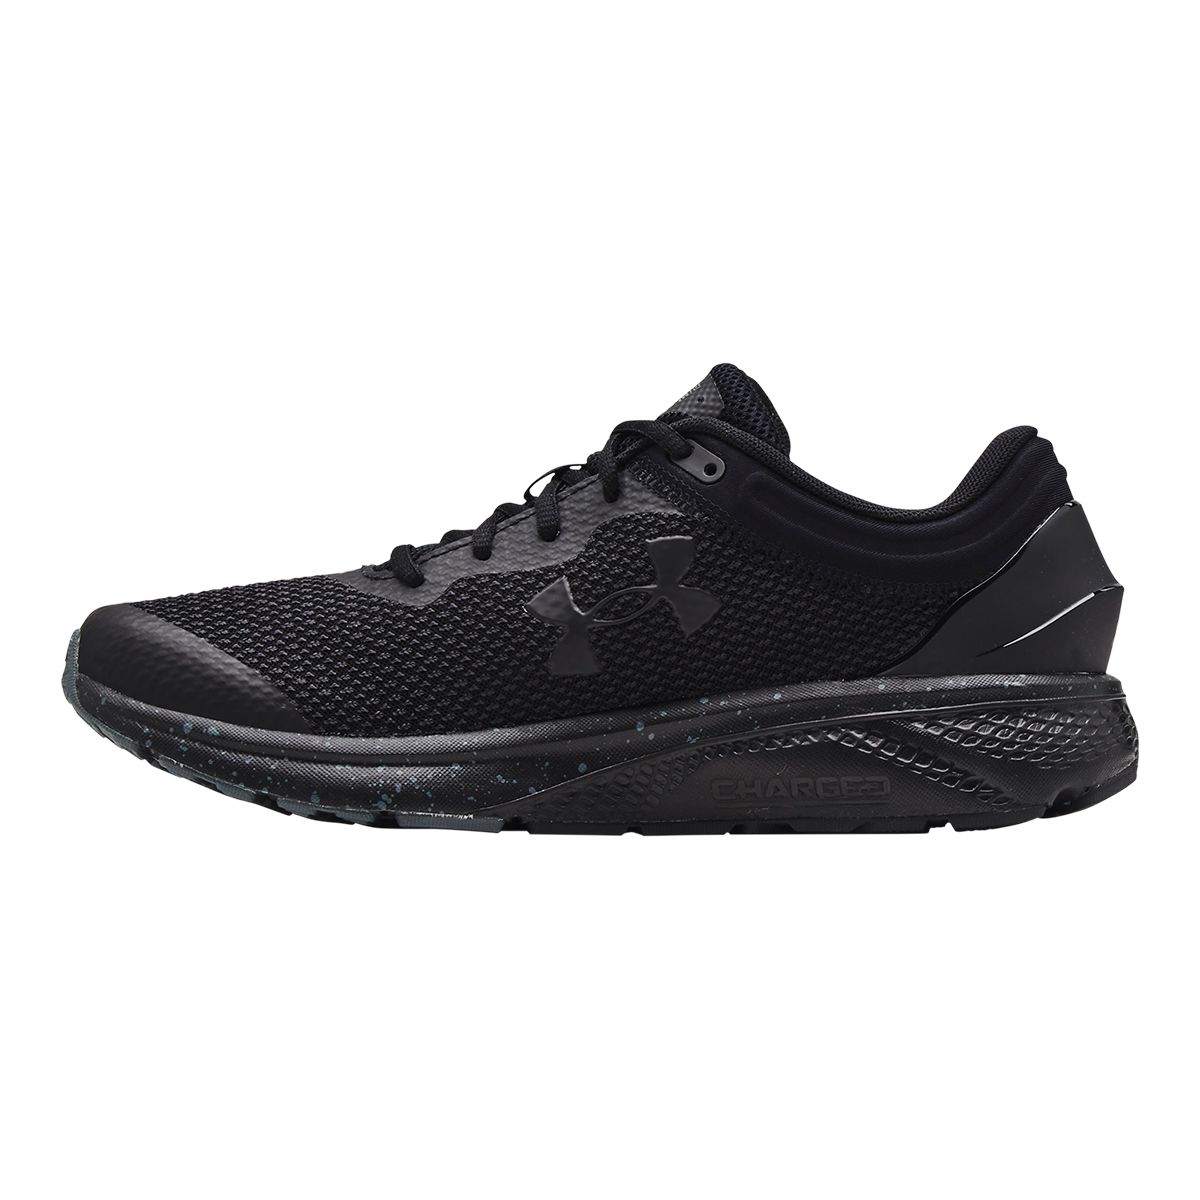 https://media-www.atmosphere.ca/product/div-05-footwear/dpt-80-footwear/sdpt-01-mens/333418161/under-armour-charged-escape-3-black-8--c1769d2b-9dbd-4906-84c1-1d1d6a16938e-jpgrendition.jpg?imdensity=1&imwidth=1244&impolicy=mZoom